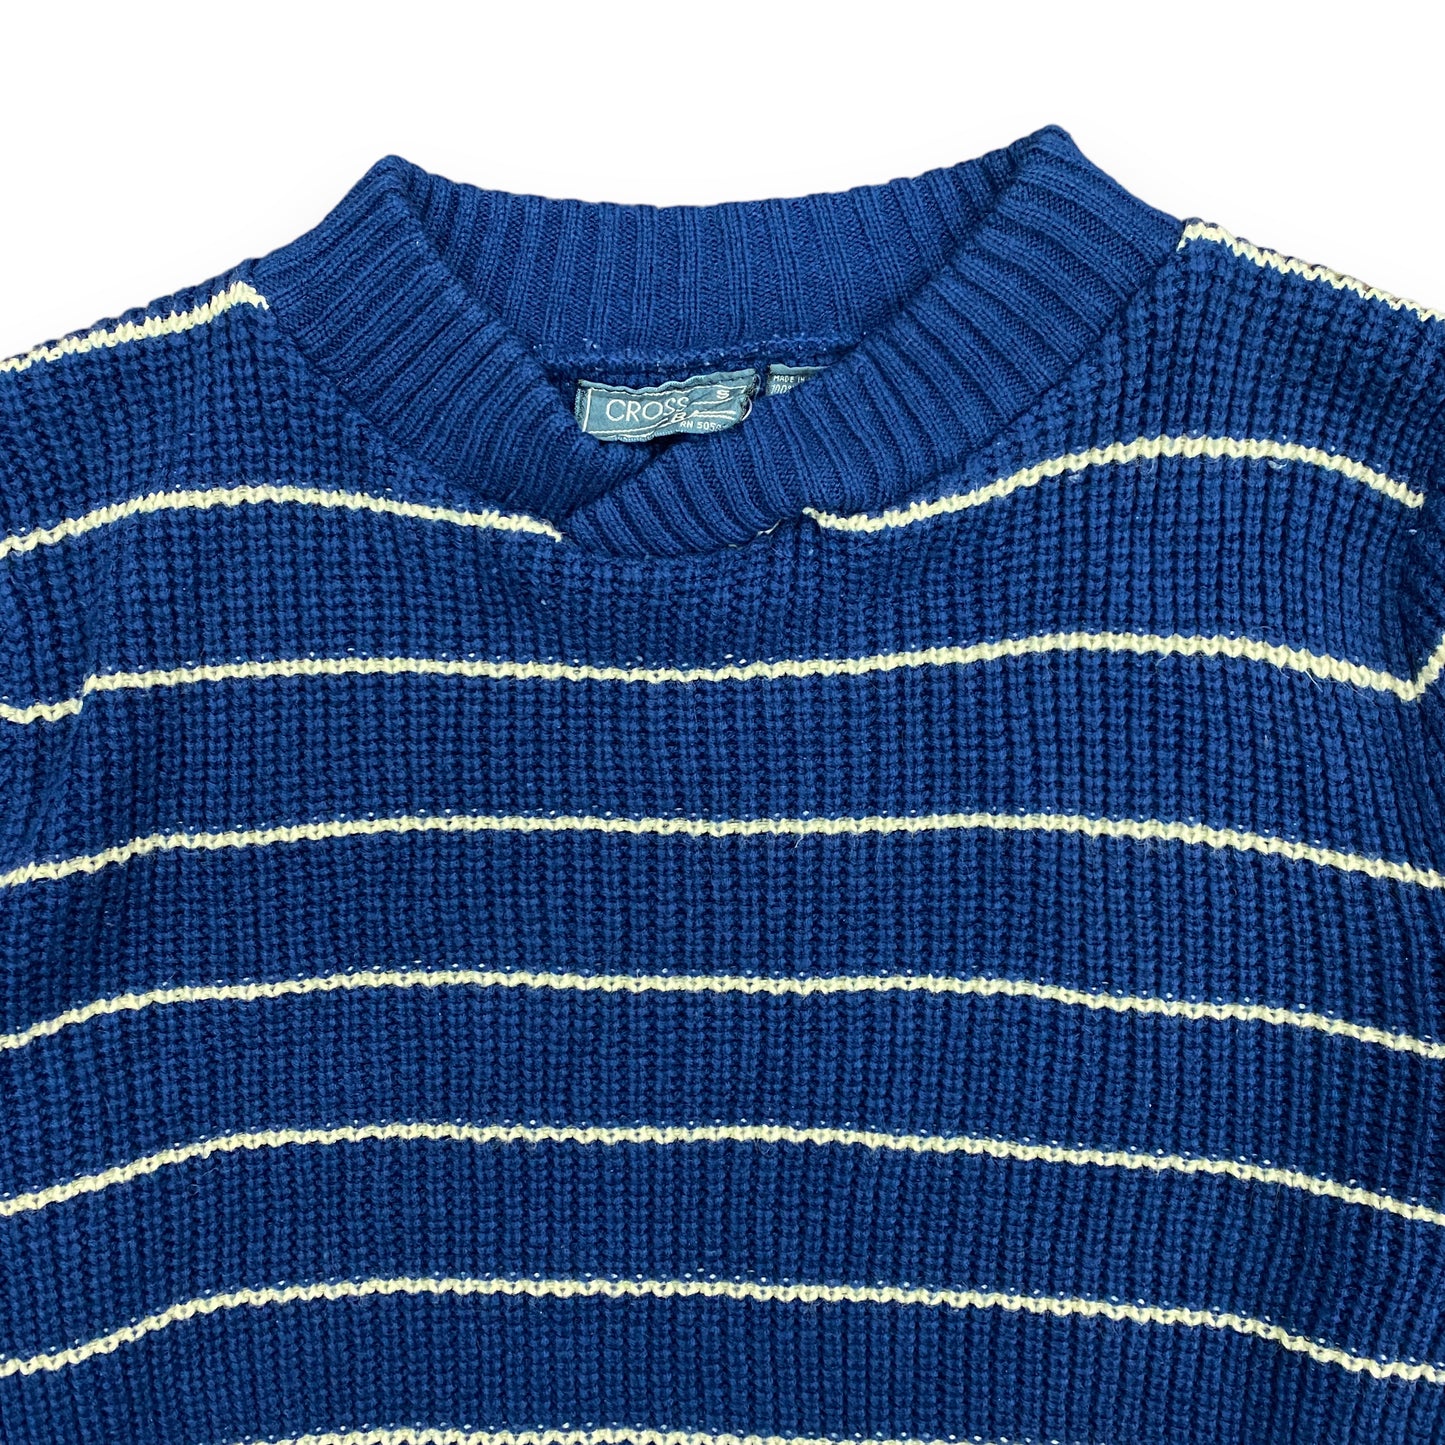 1980s Navy & White Stripes Sweater by Cross Bay - Size Small